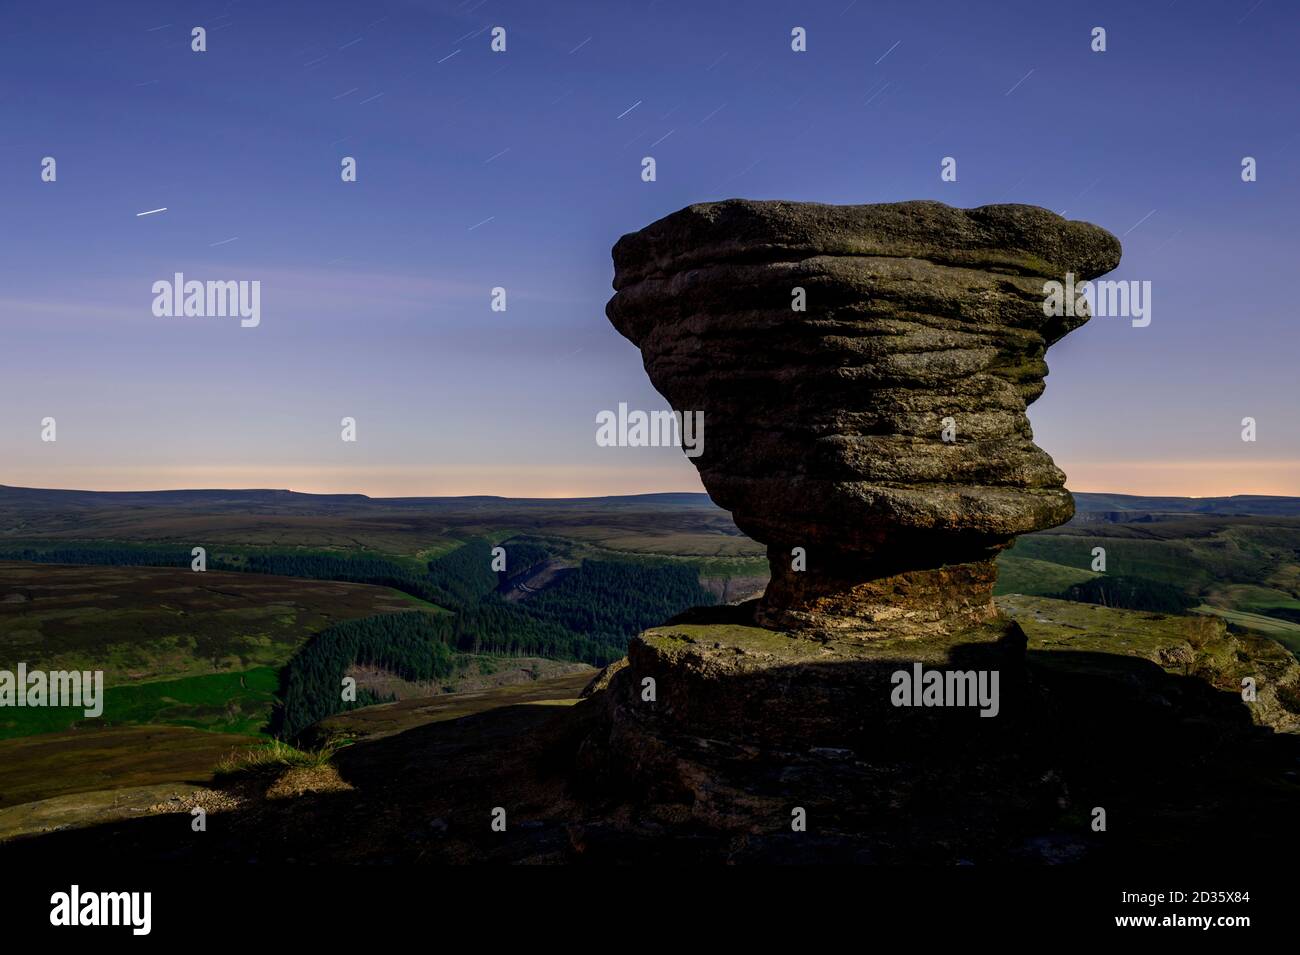 Weathered rock formation lit by the full moon, Fairbrook Naze, Kinder Scout, Derbyshire, Peak District, England, UK Stock Photo